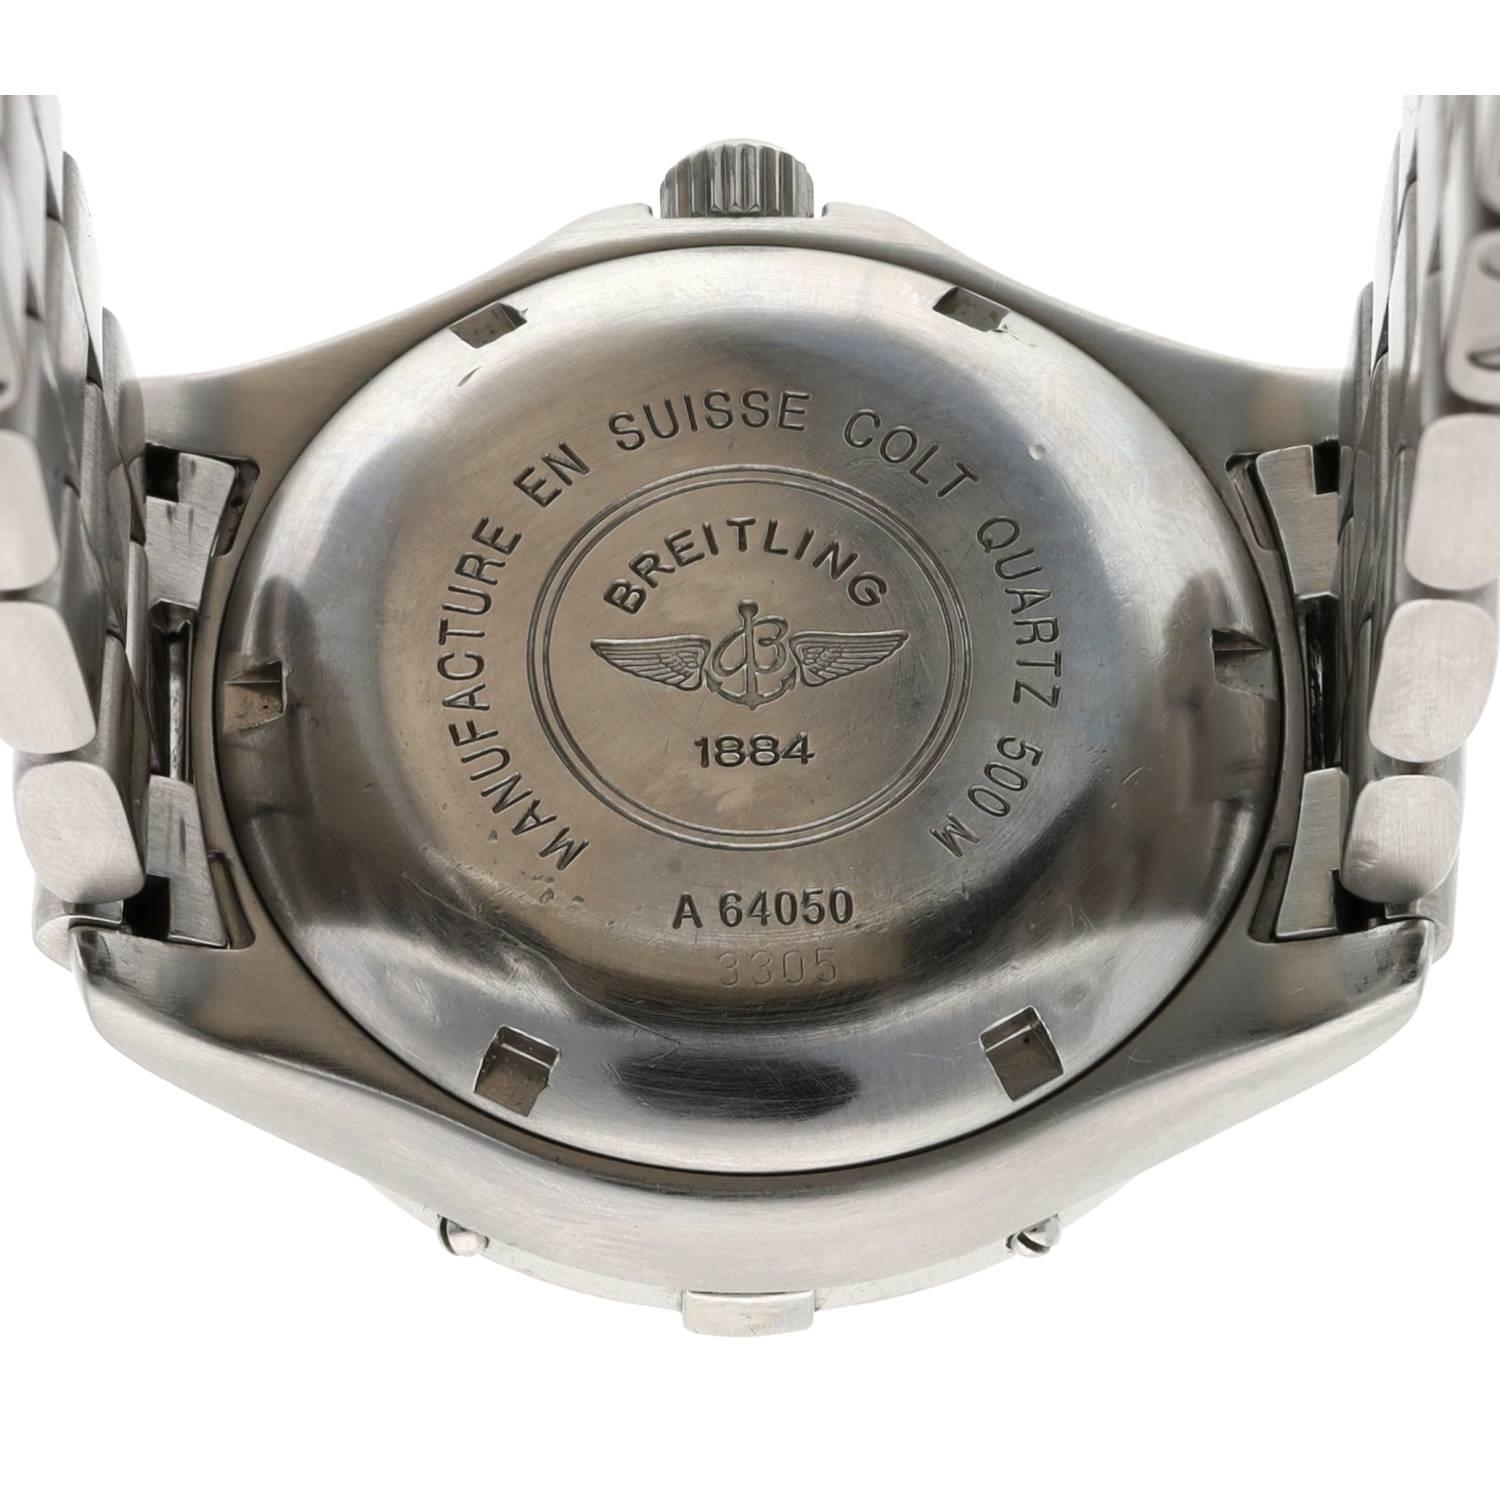 Breitling Colt Ocean stainless steel gentleman's wristwatch, reference no. A64050, serial no. - Image 4 of 4